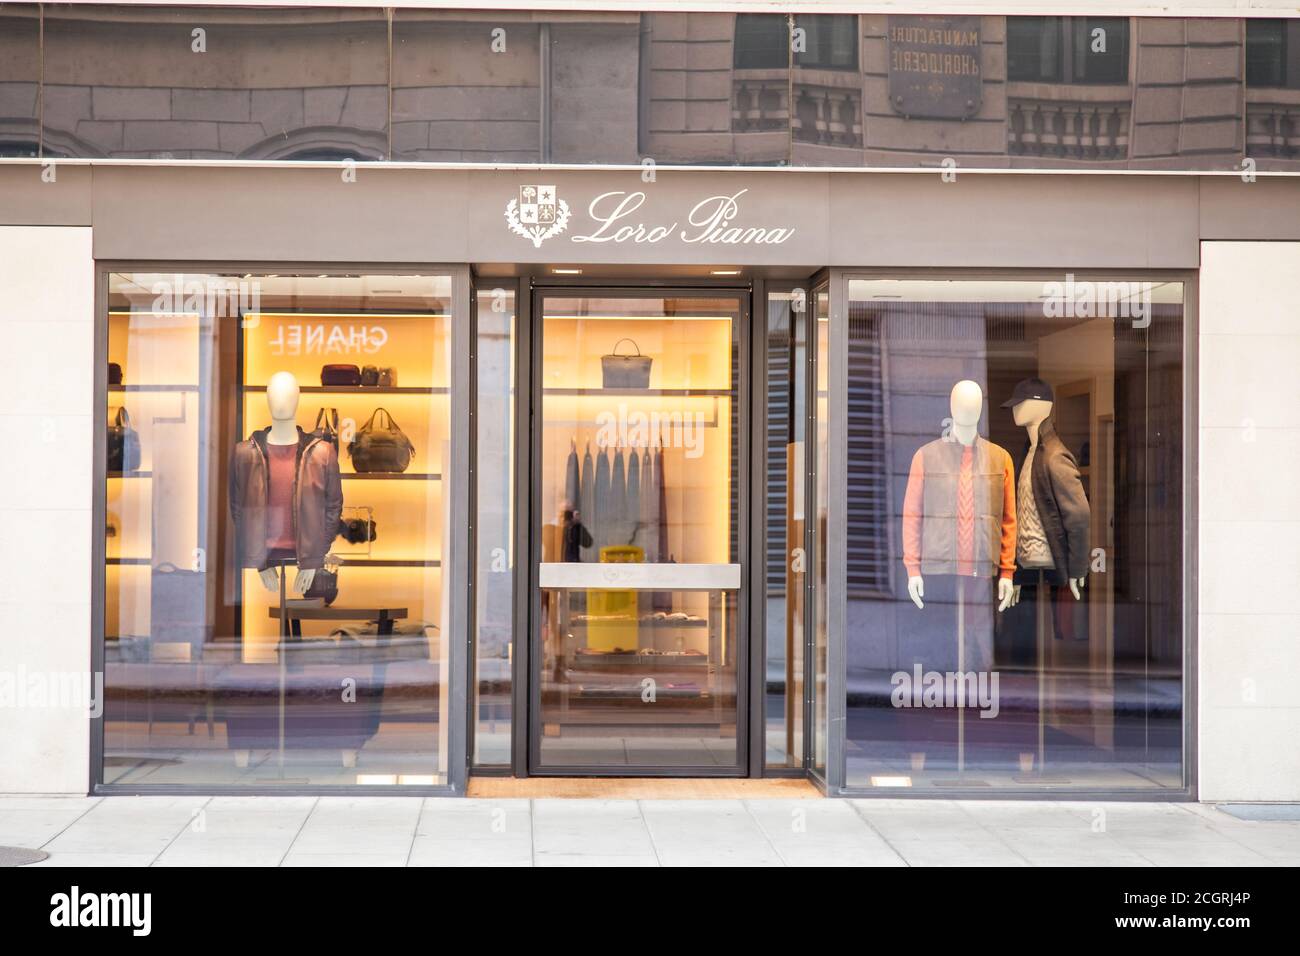 Loro Piana Store High Resolution Stock Photography and Images - Alamy